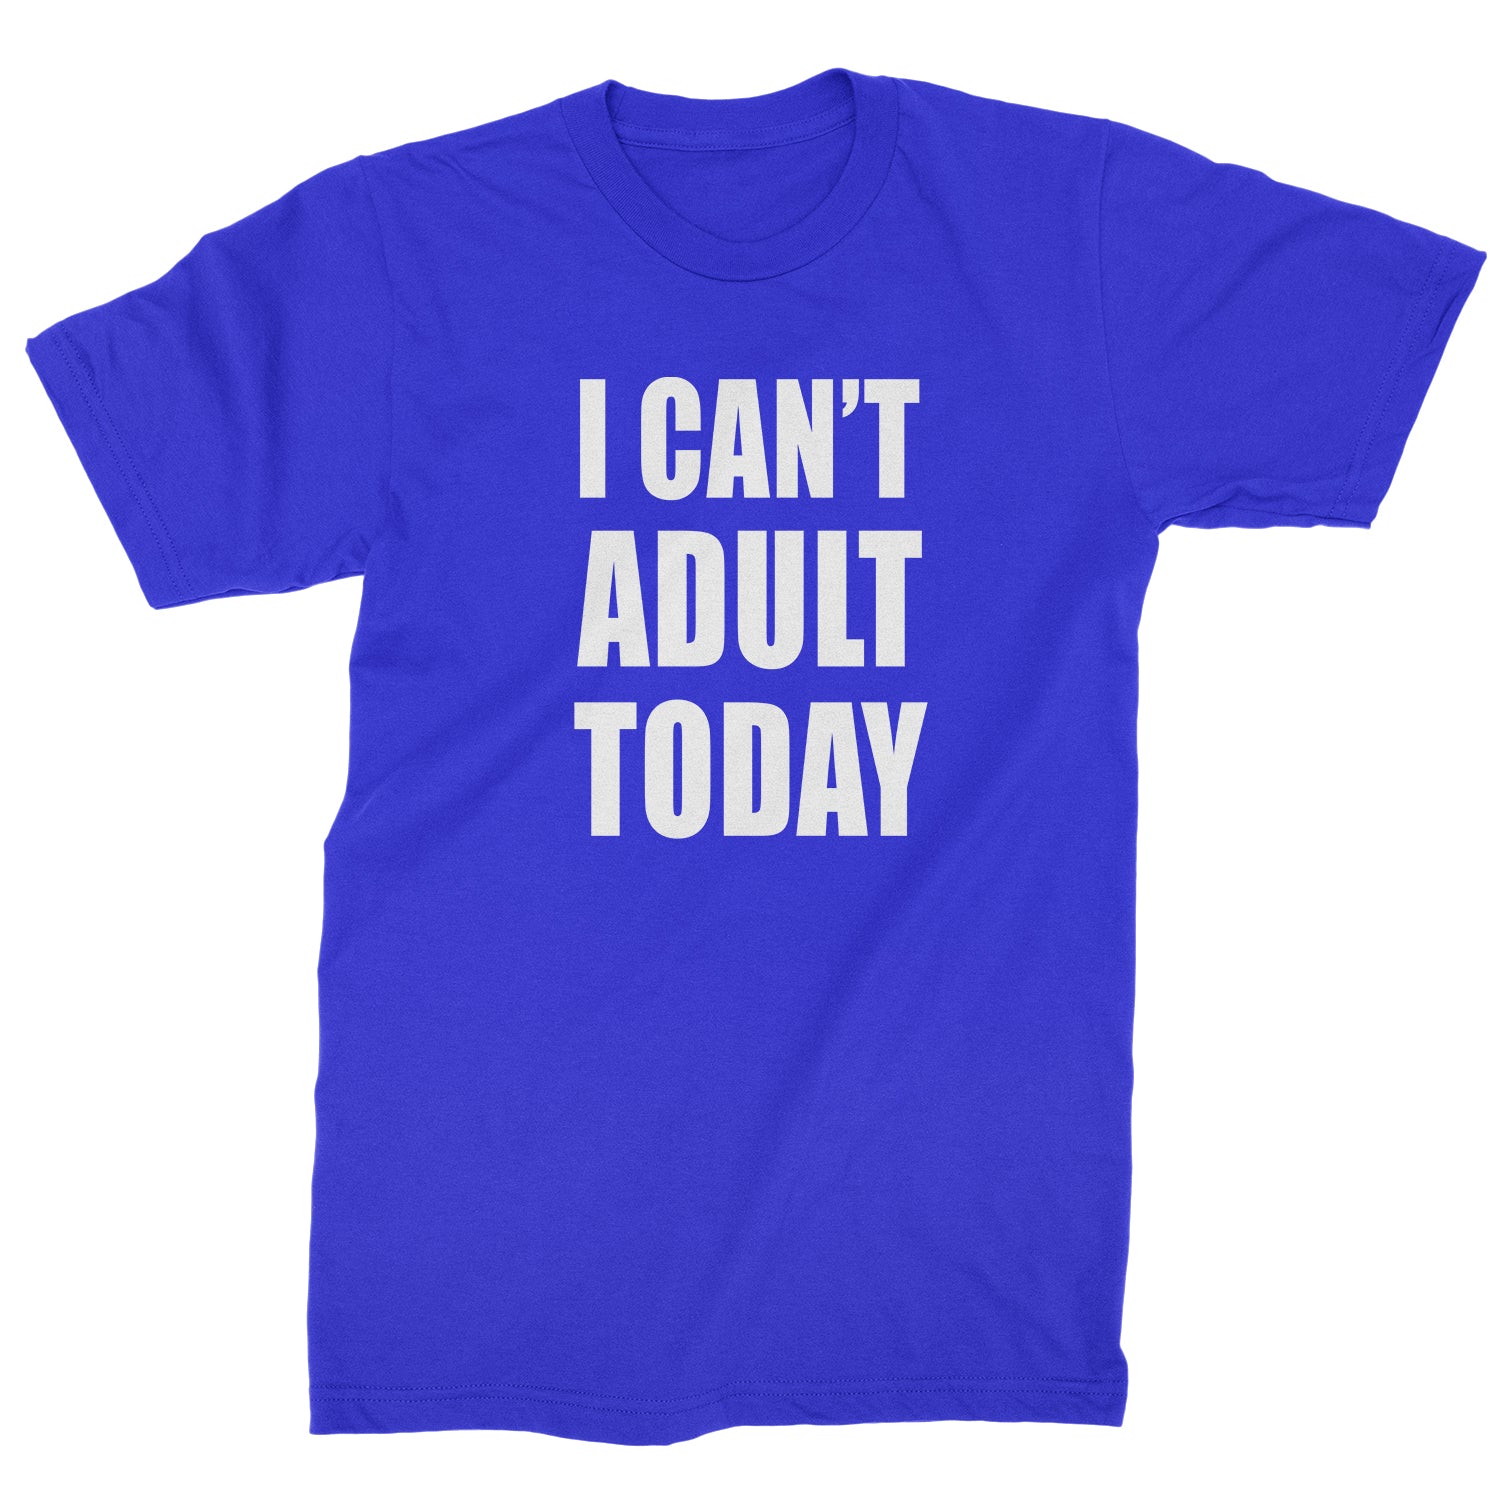 I Can't Adult Today Mens T-shirt adult, cant, I, today by Expression Tees